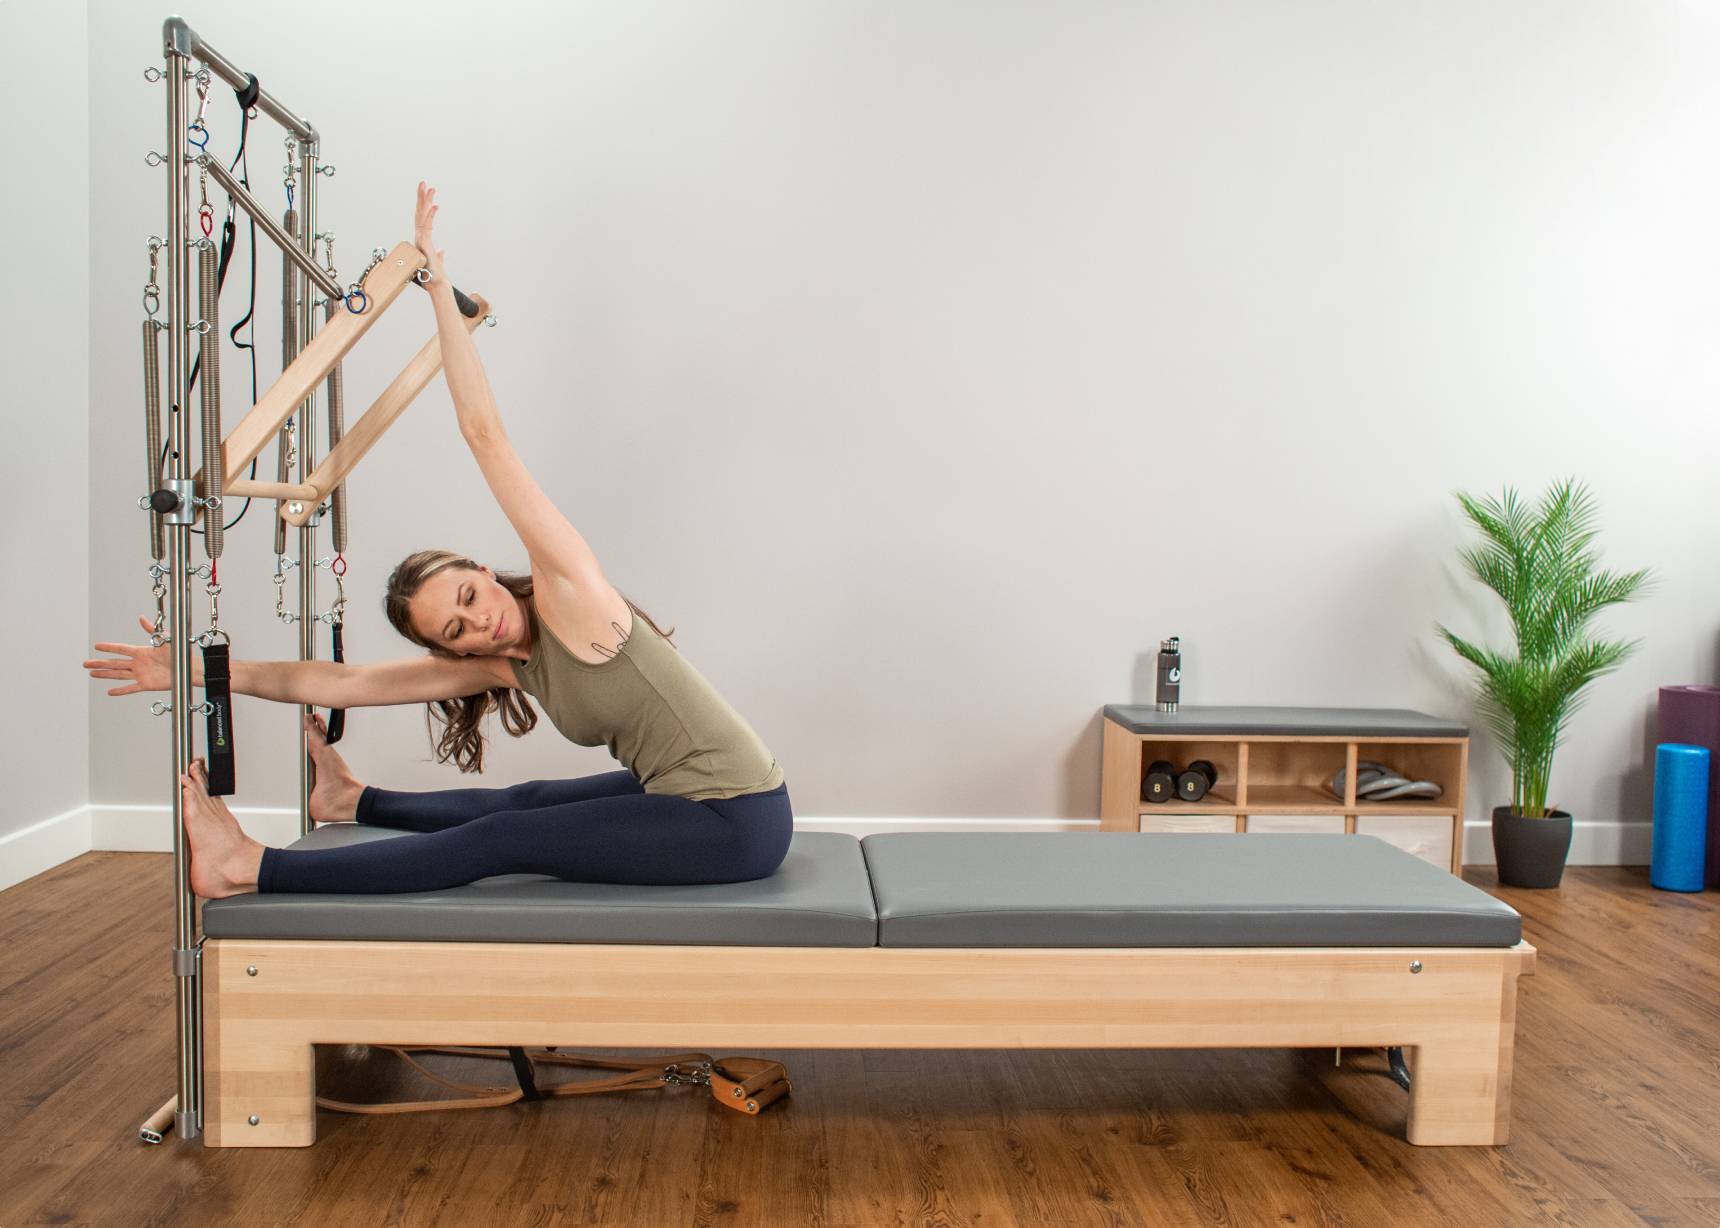 Balanced Body Studio Reformer + Tower Unboxing and Assembly 